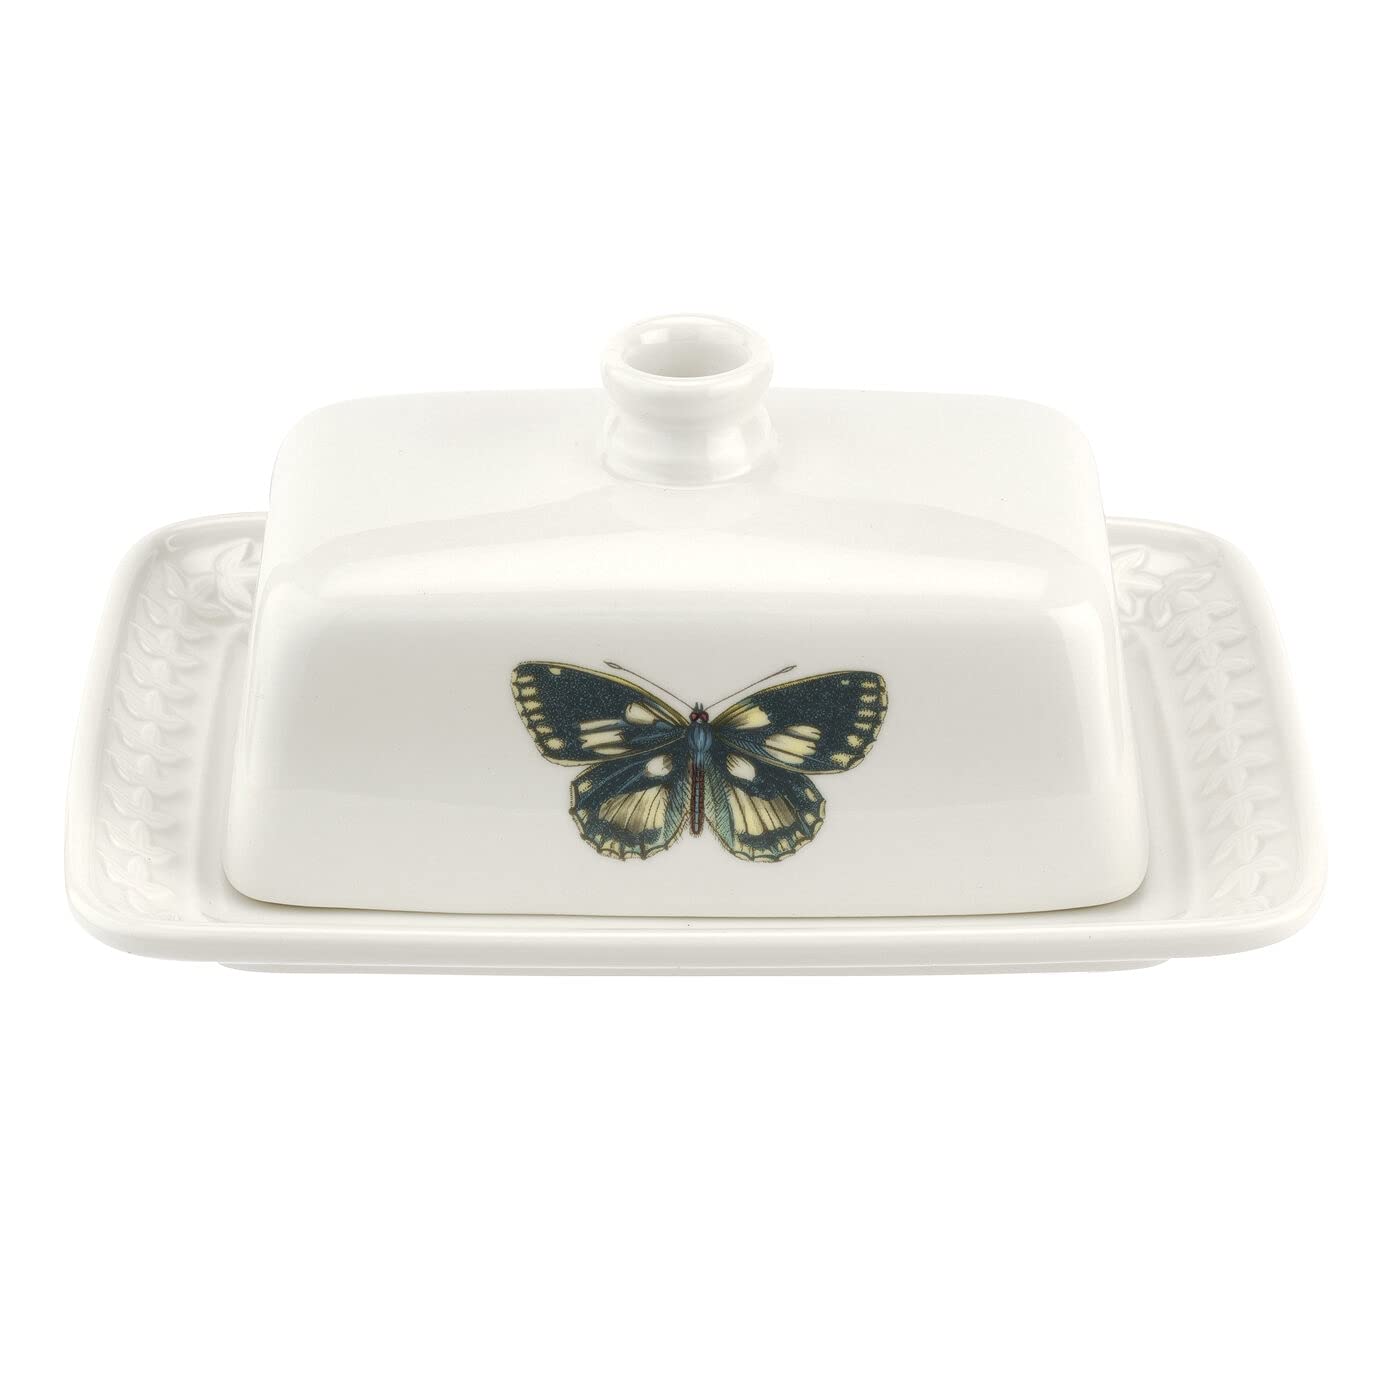 Portmeirion Botanic Garden Harmony Covered Butter Dish, 7.5-Inch Butterfly Design Ceramic Butter Dish with Lid for Countertop, Made of Earthenware, Dishwasher Safe